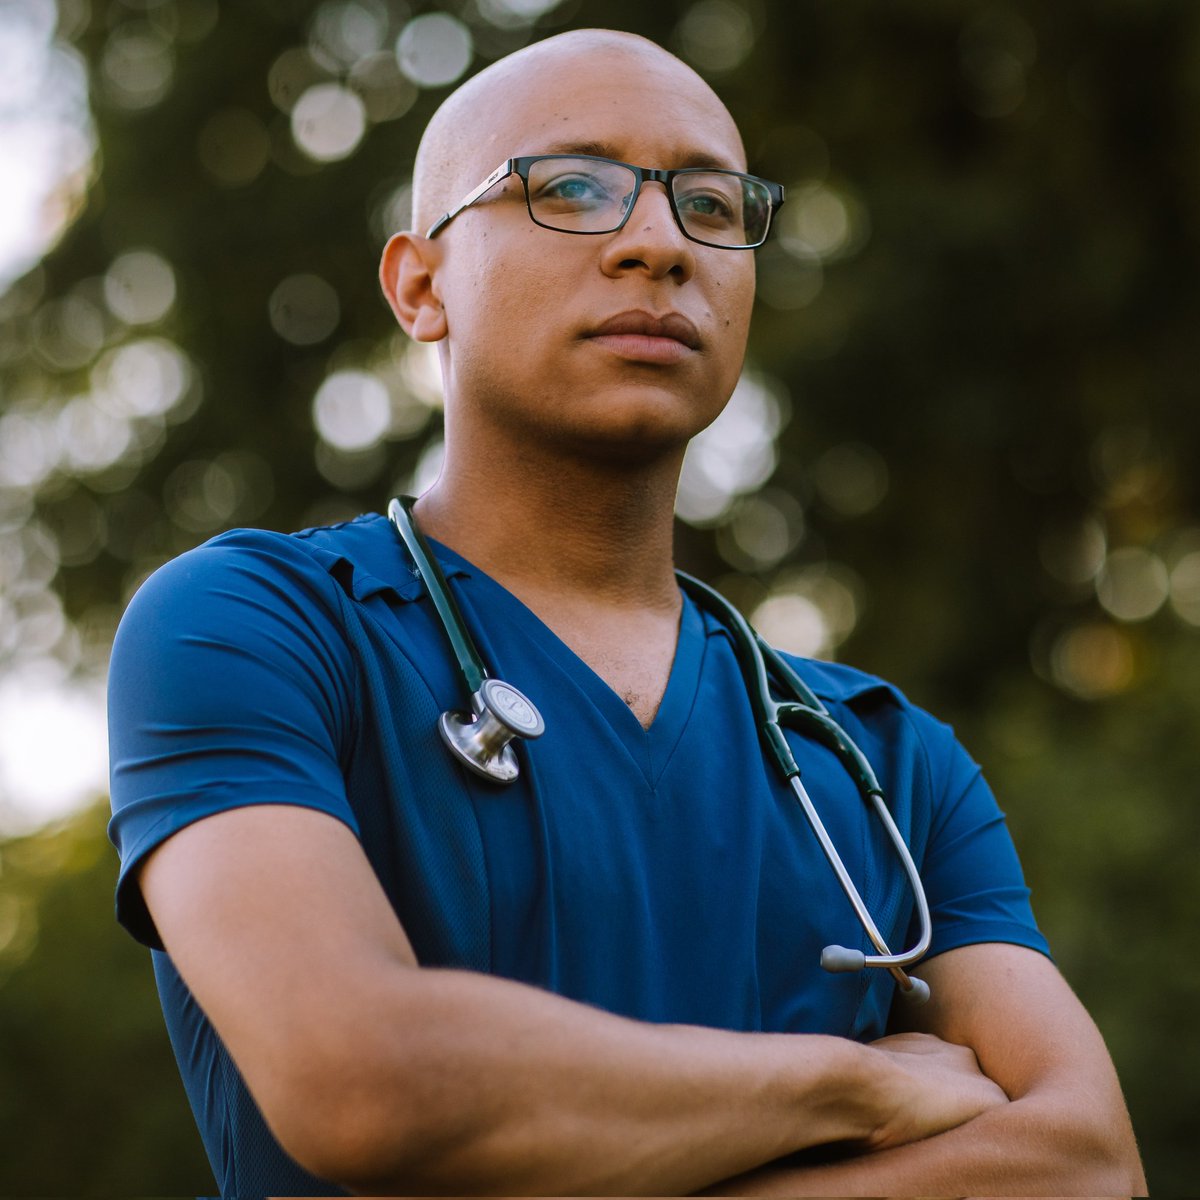 So grateful and honored to be highlighted by @MSUPubHealth for a featured photoshoot showcasing the diversity, grit and character of our students! #MDMPHcandidate #dualdegree #MSU #SPARTAN #GOGREEN #GOWHITE #medtwitter #Blackinmedicine #Blackinpublichealth